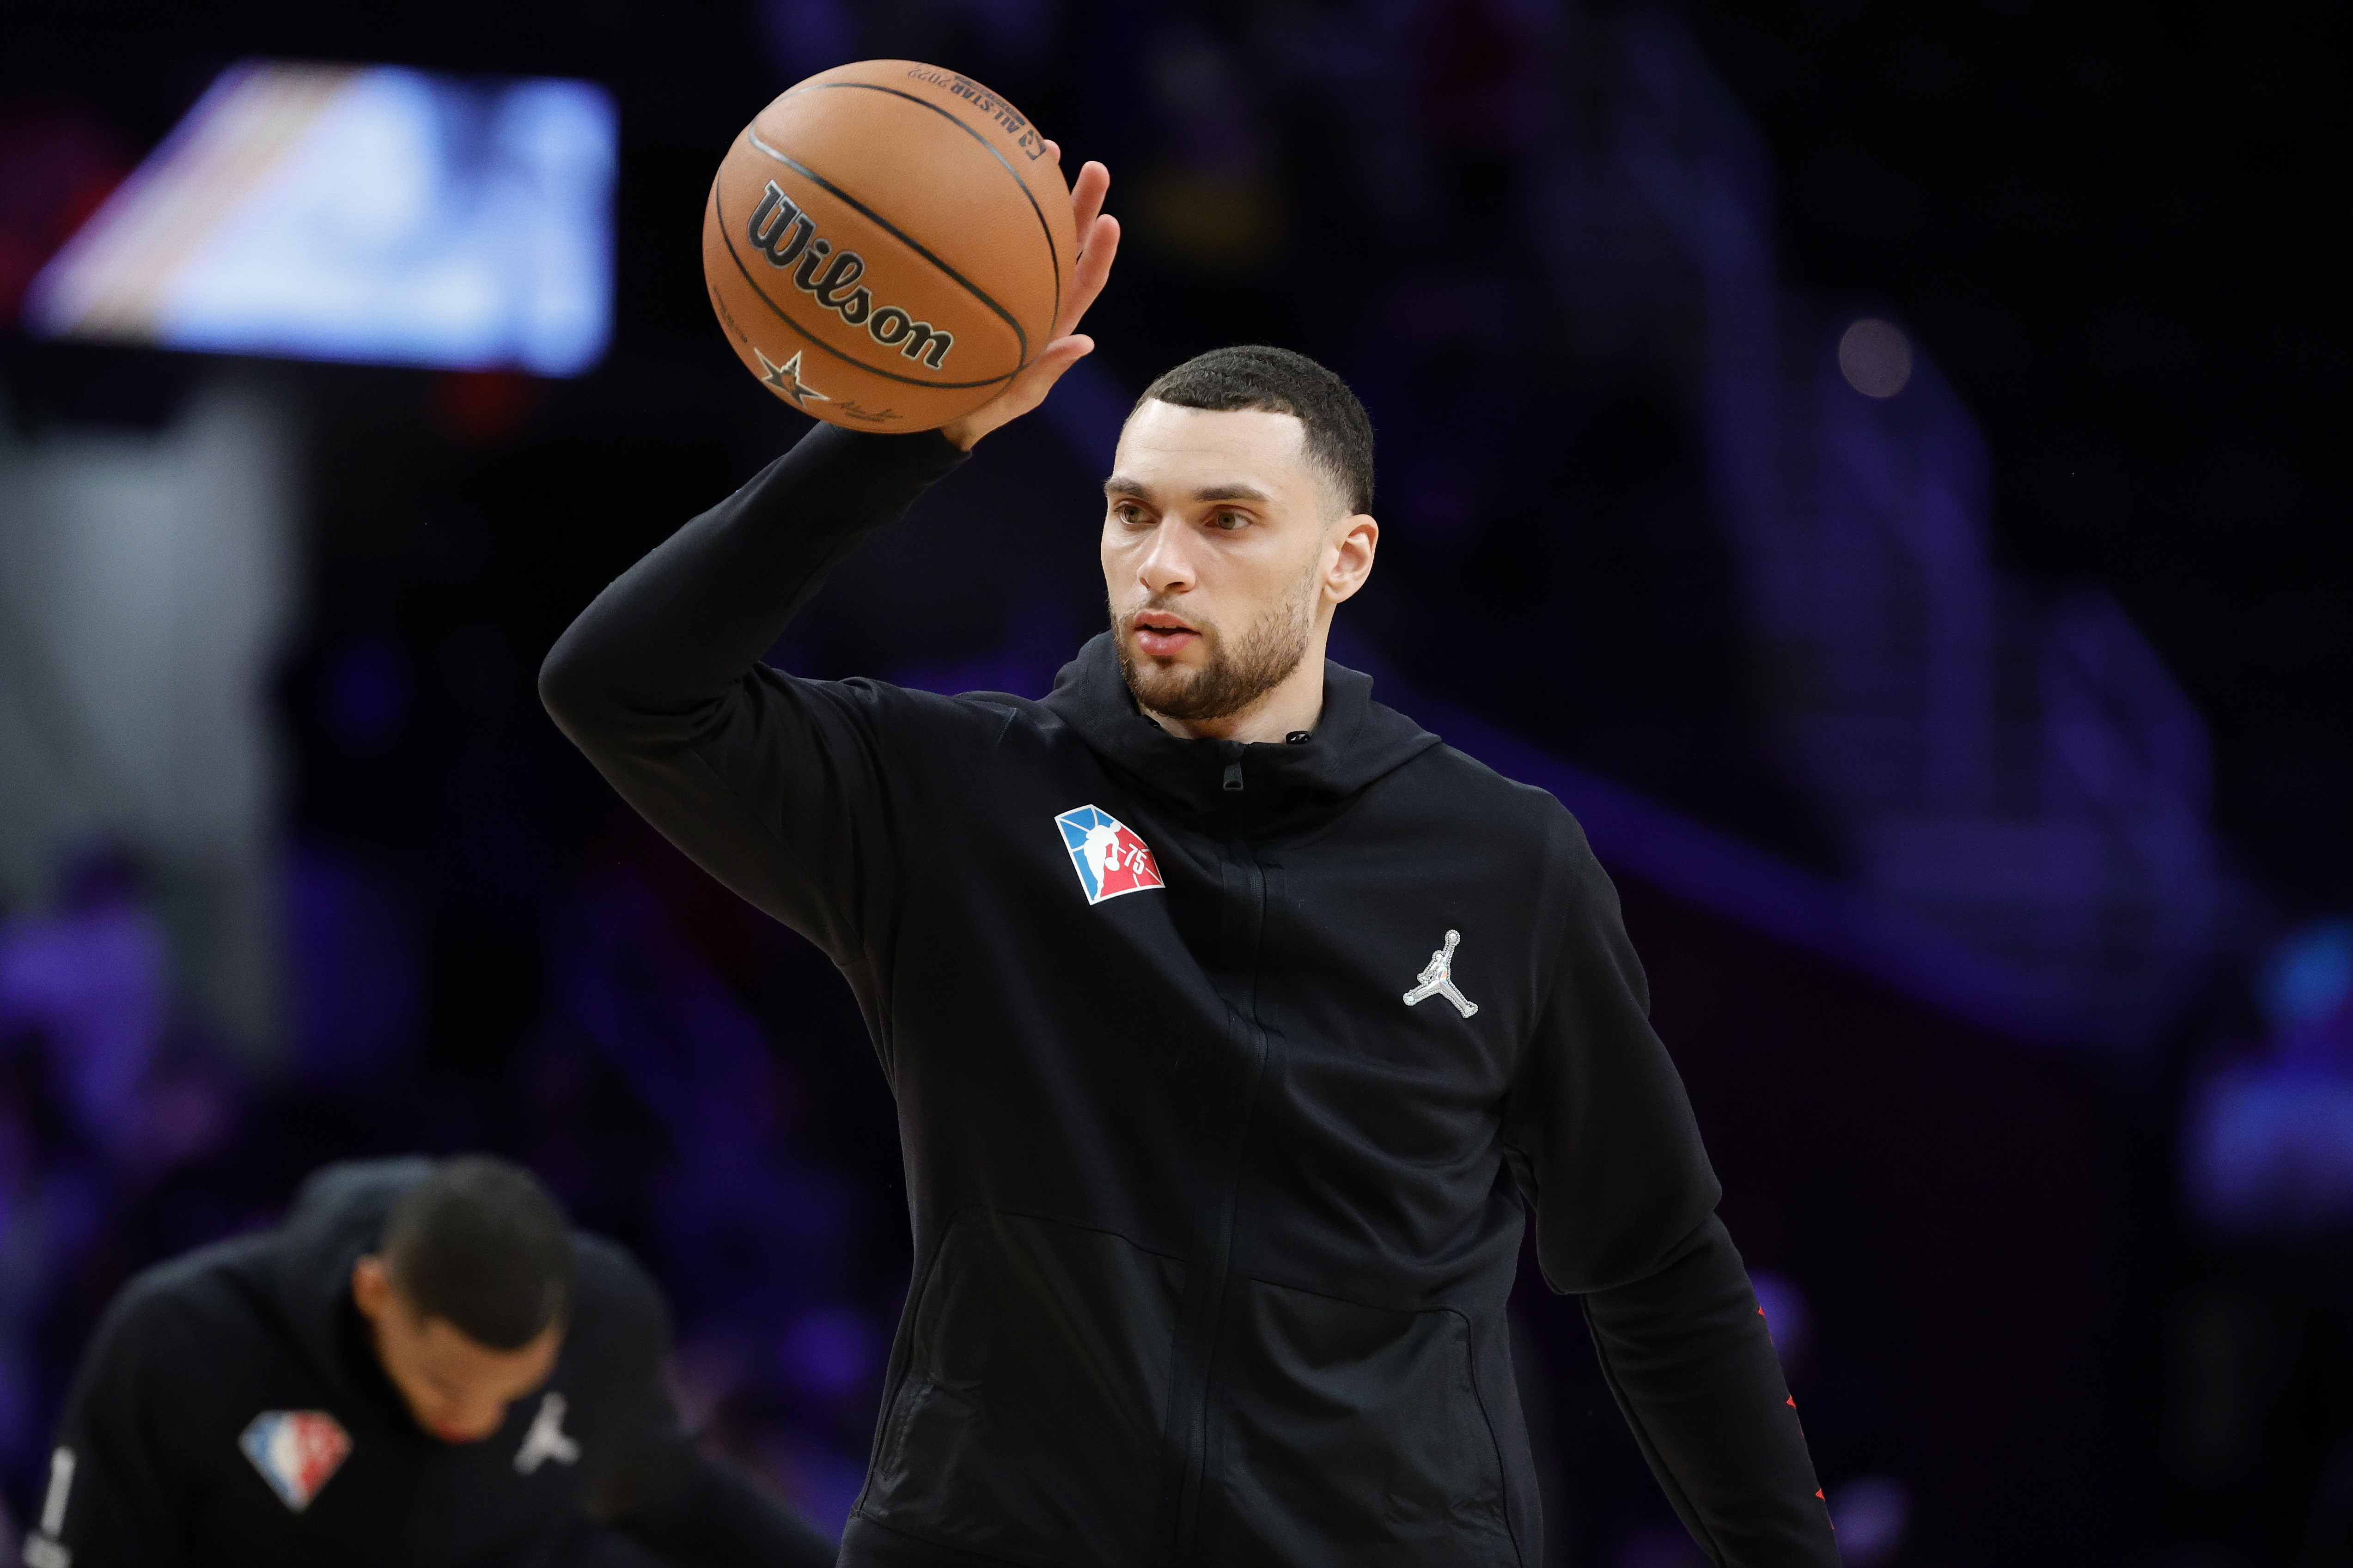 Chicago Bulls star Zach LaVine warms up before the 2022 NBA All-Star Game